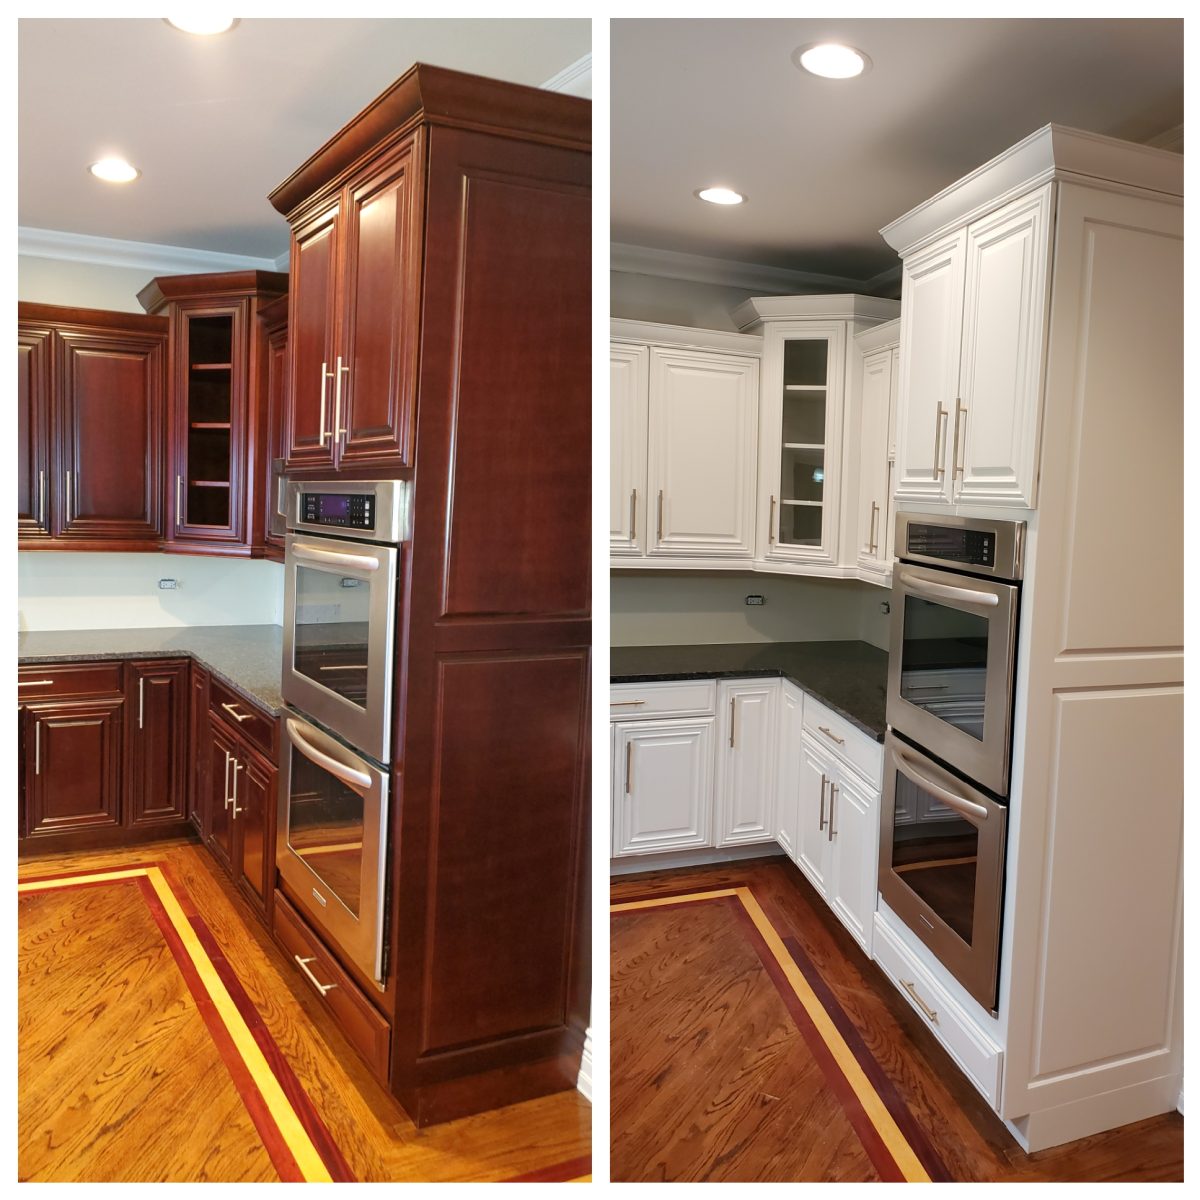 Tips For Painting Cherry Cabinets White, White Washed Cherry Kitchen Cabinets